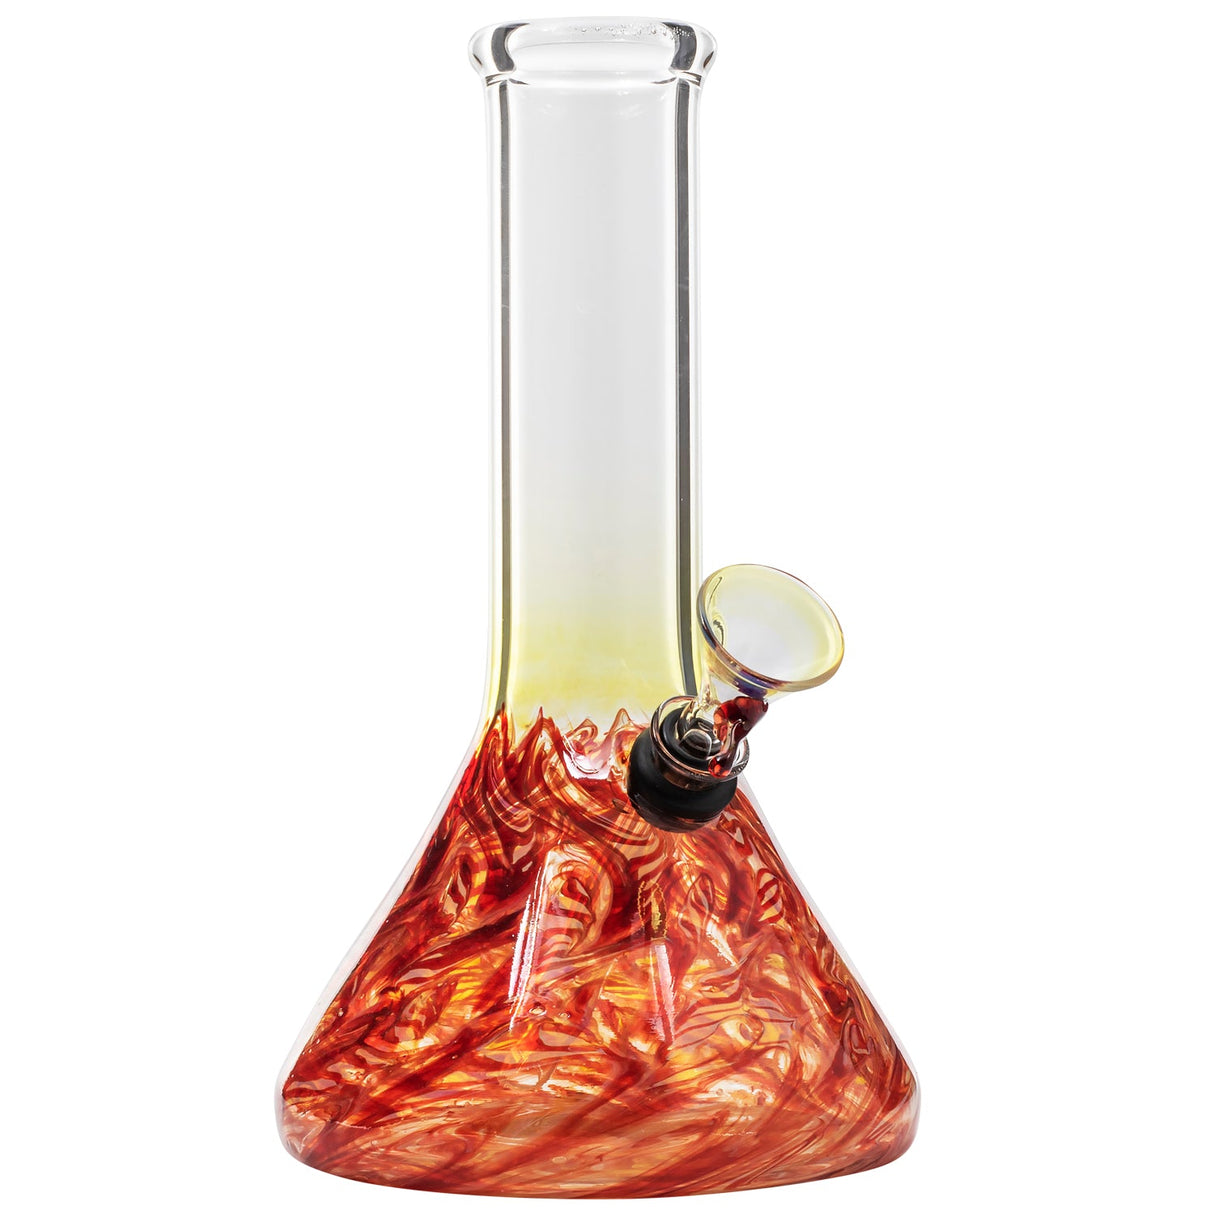 LA Pipes 8" Raked Beaker Water Pipe in Red with Borosilicate Glass - Front View